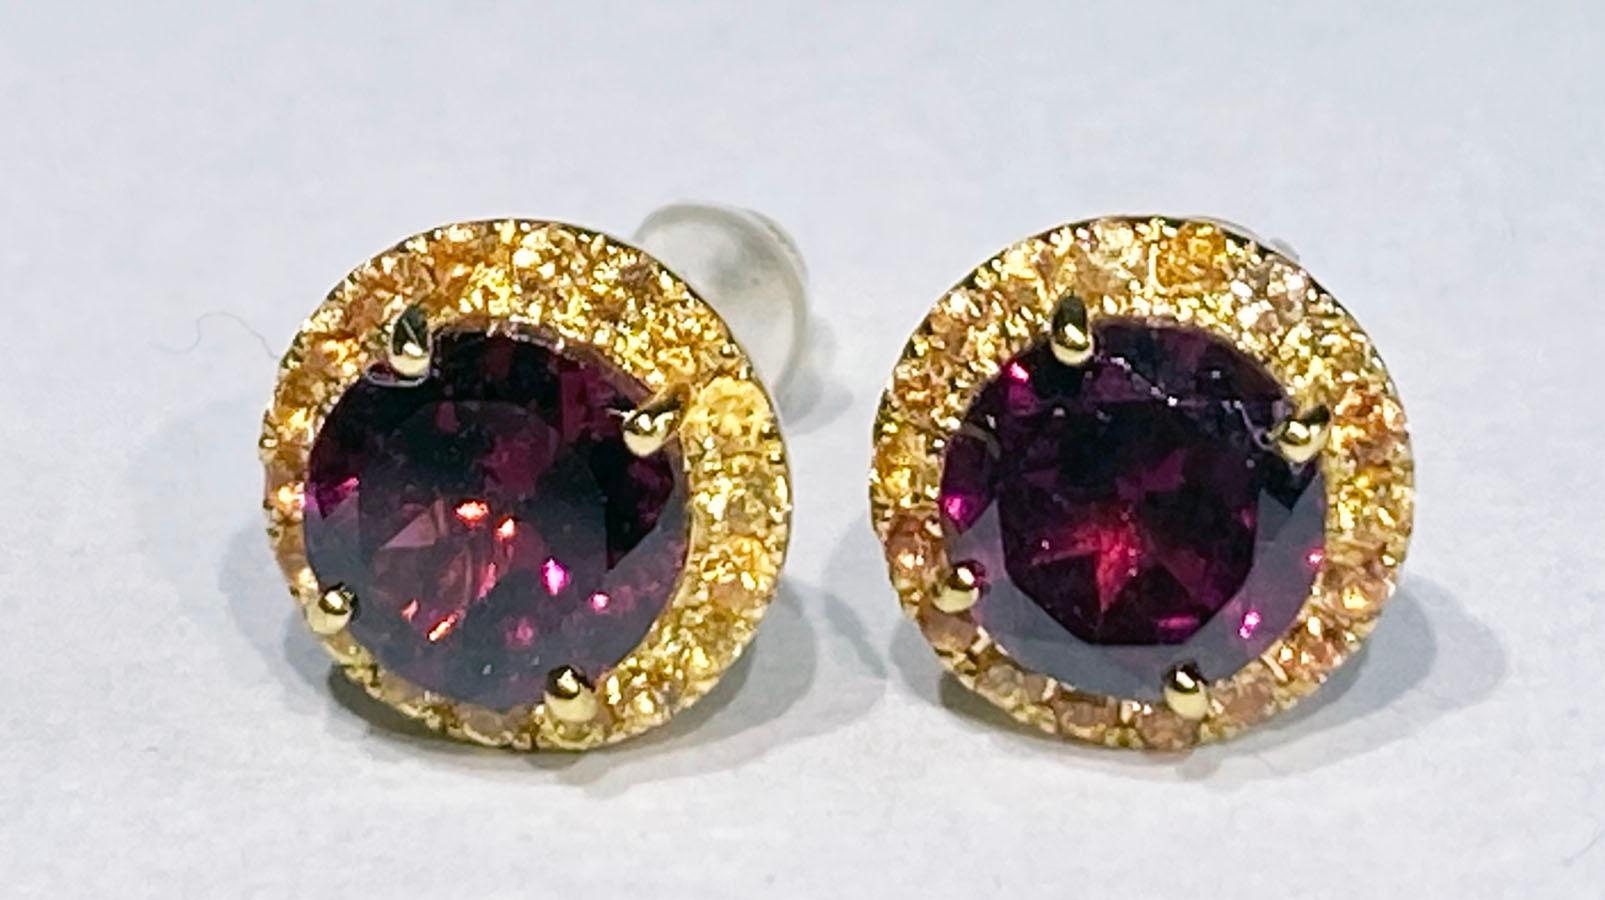 Rhodolite Garnet & Orange Sapphire Earrings set in 14kt Yellow Gold. Rhodolite Garnets are 1.83 Carats total weight with 0.3 Carats of round Yellow Sapphires surrounding the Garnets.

Originally from San Diego, California, Kary Adam lived in the